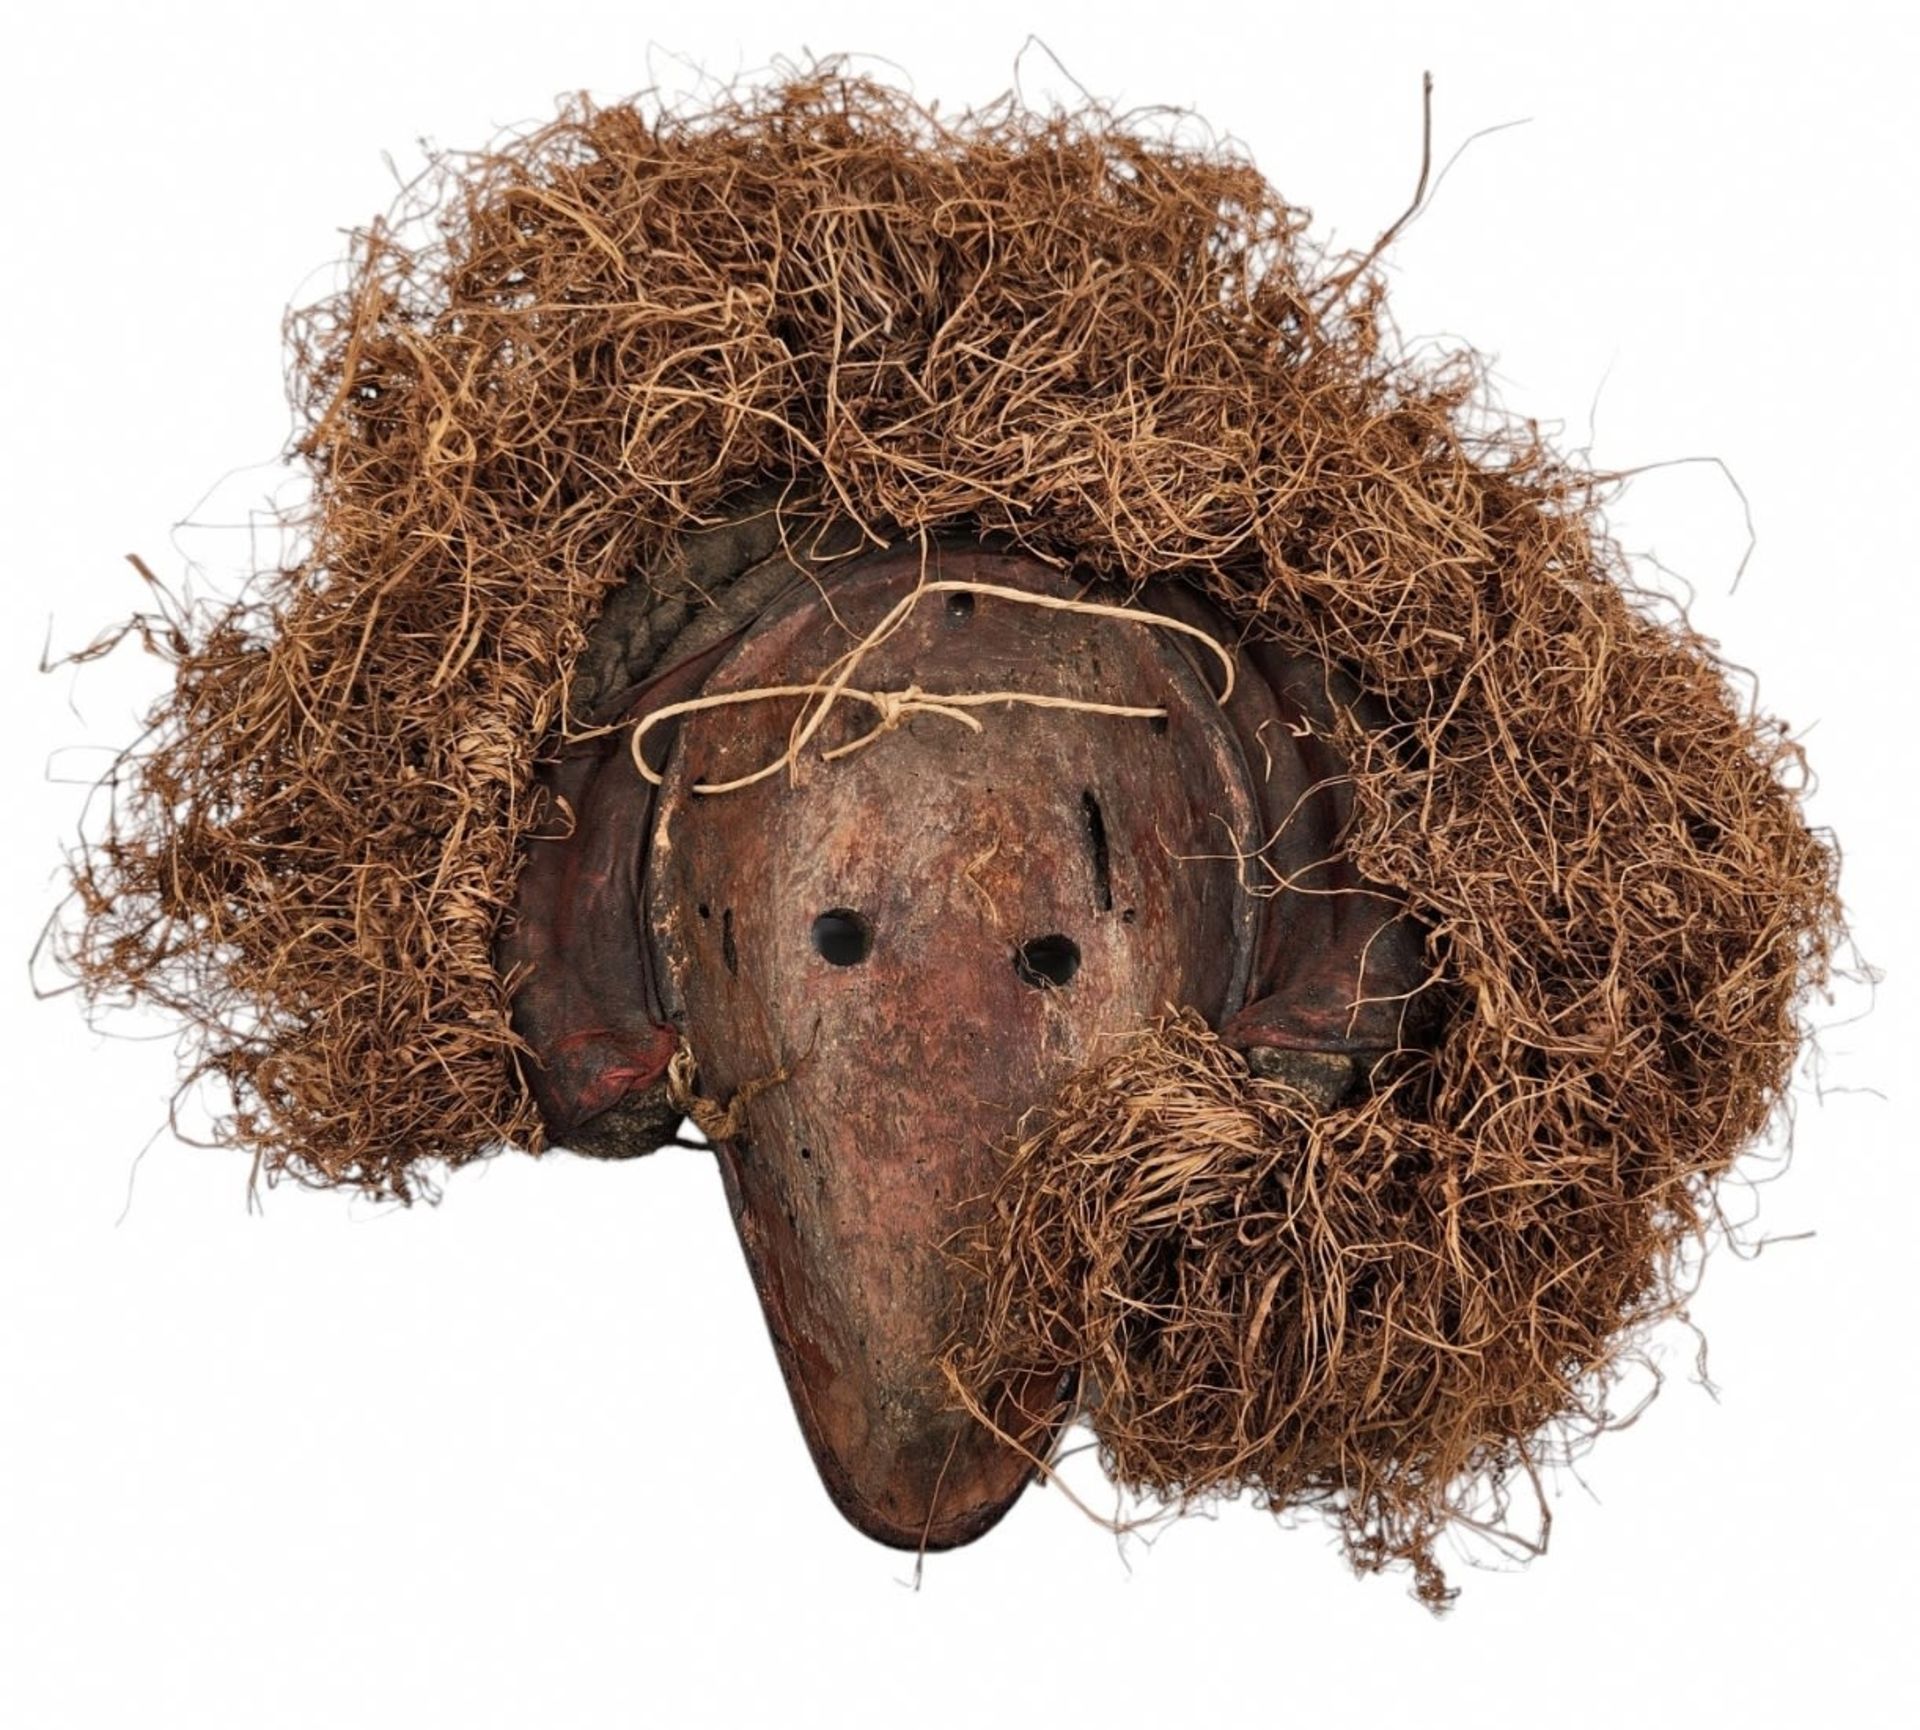 Antique African mask - Dan People, made of carved wood and plant fibers, decorated with shells - Image 3 of 3